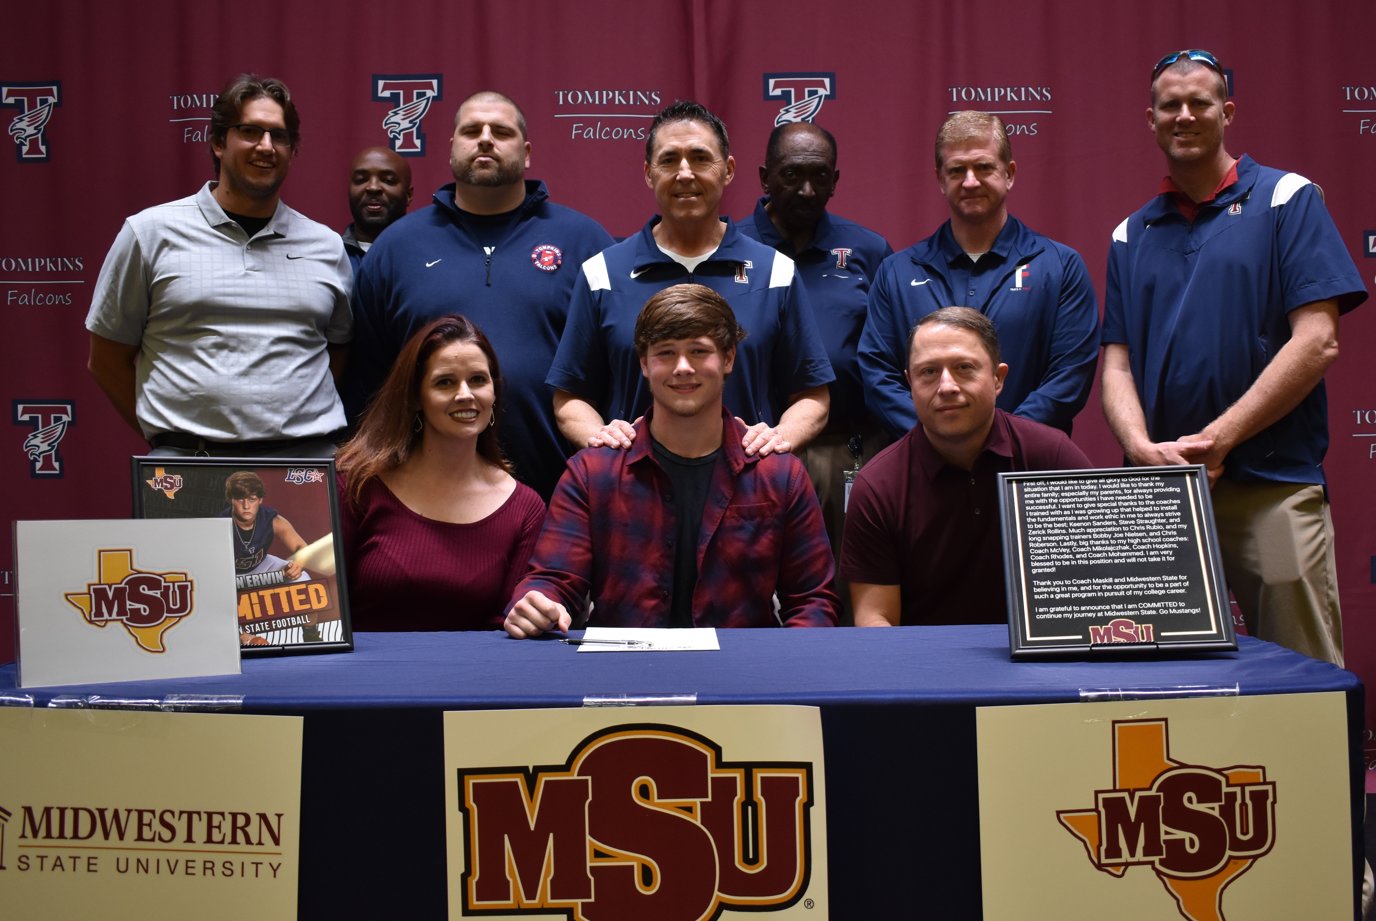 Dylan Erwin signed to play football at Midwestern State University.